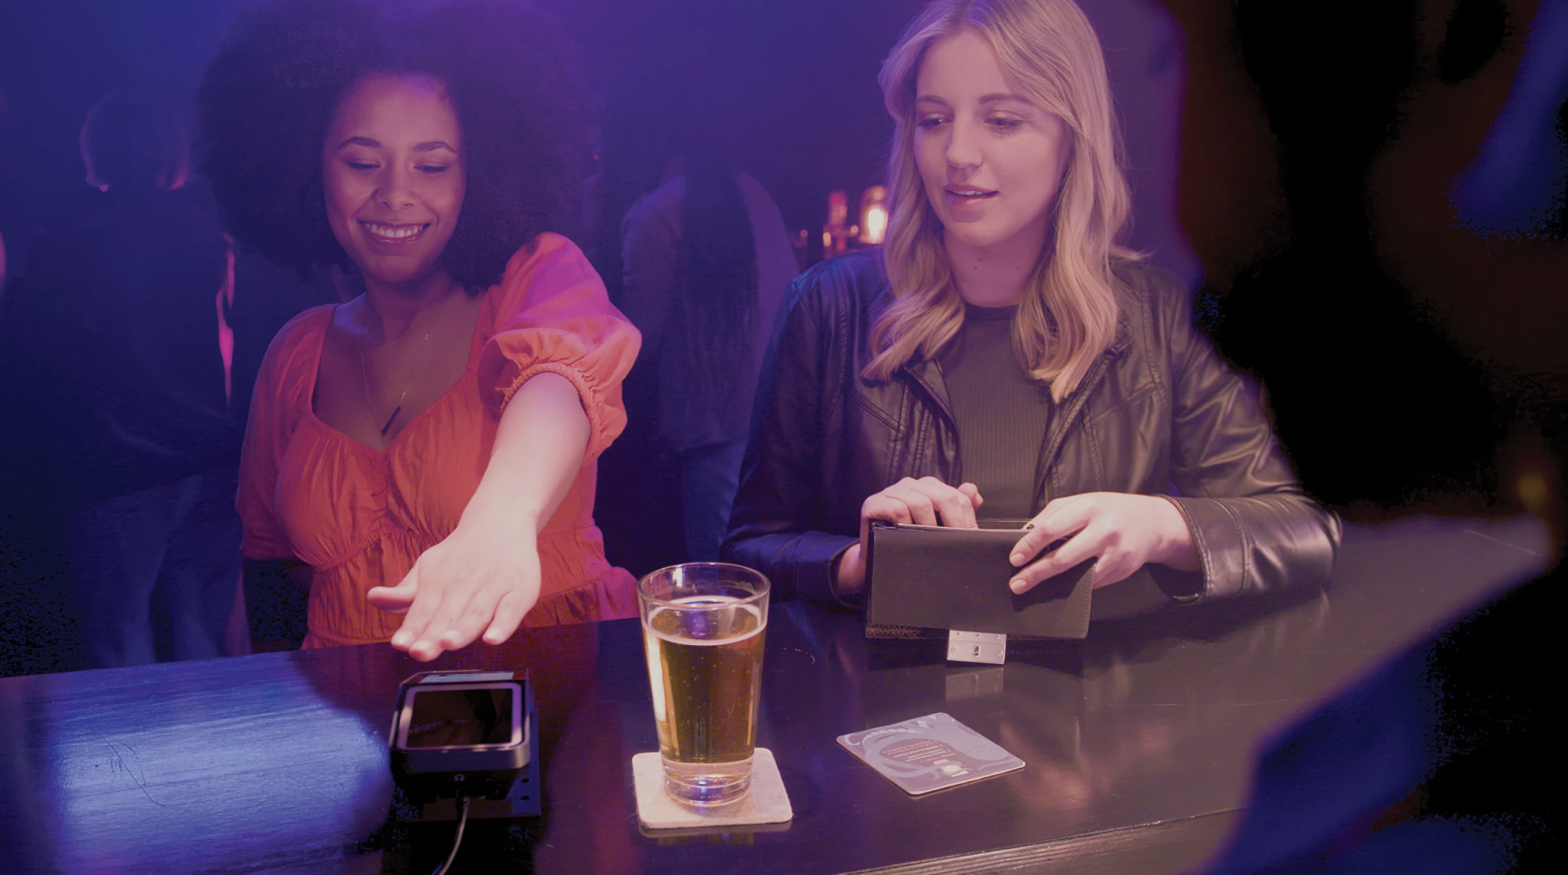 Flashing your palm over an Amazon One device will signal to the bartender that you are of legal age to drink, along with a photo of you for verification.  (Image: Amazon)